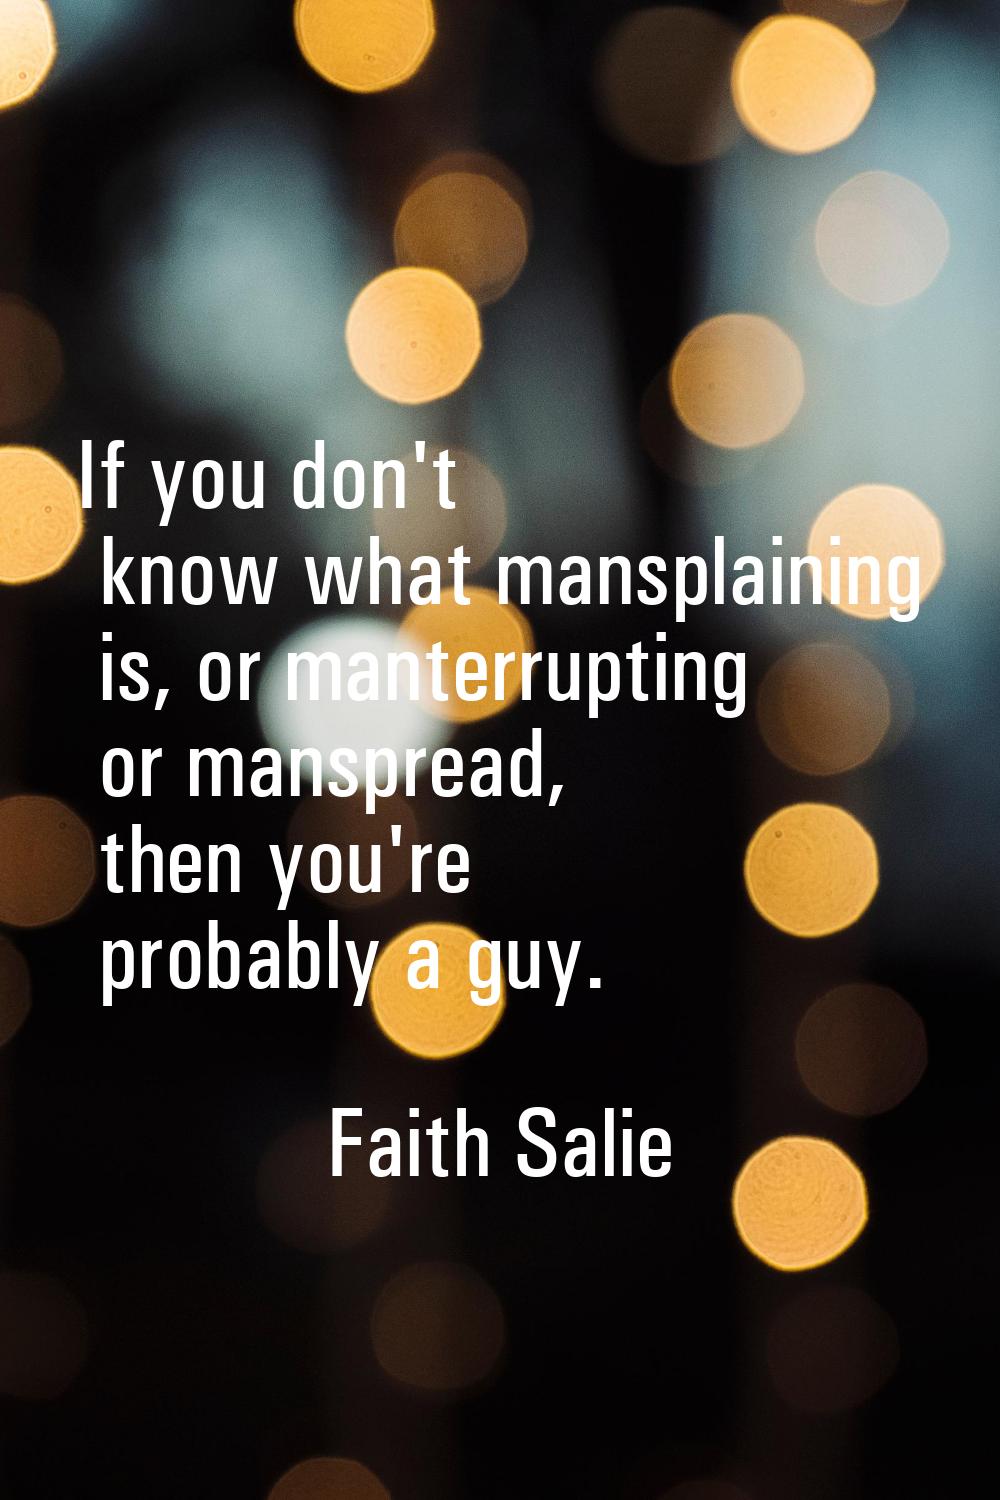 If you don't know what mansplaining is, or manterrupting or manspread, then you're probably a guy.